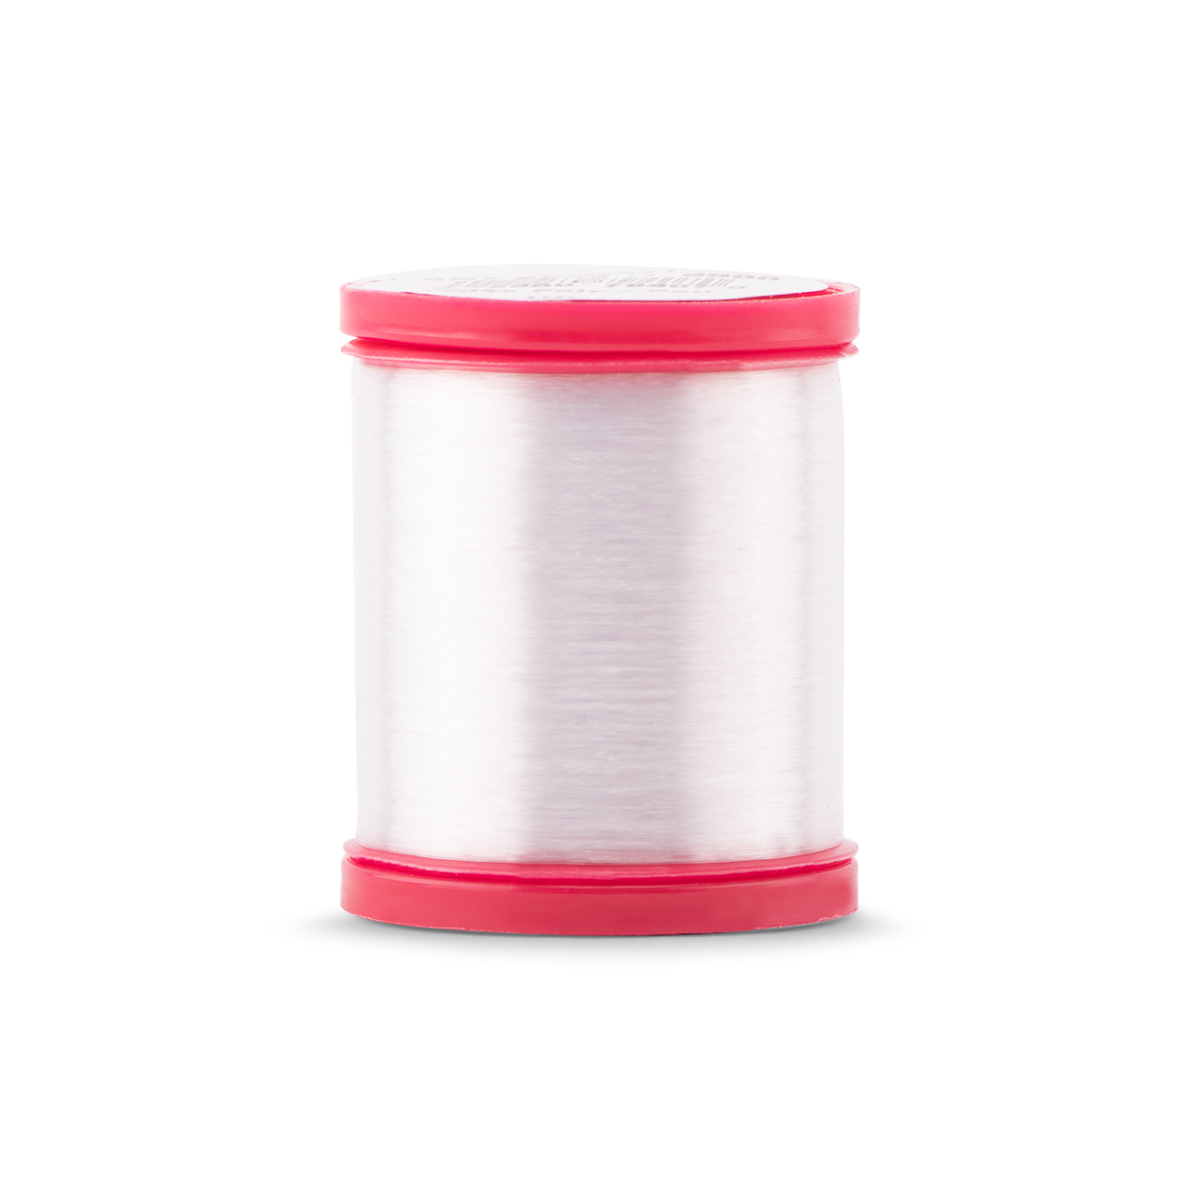 Coats Transparent Polyester Thread 400yd (Clear)